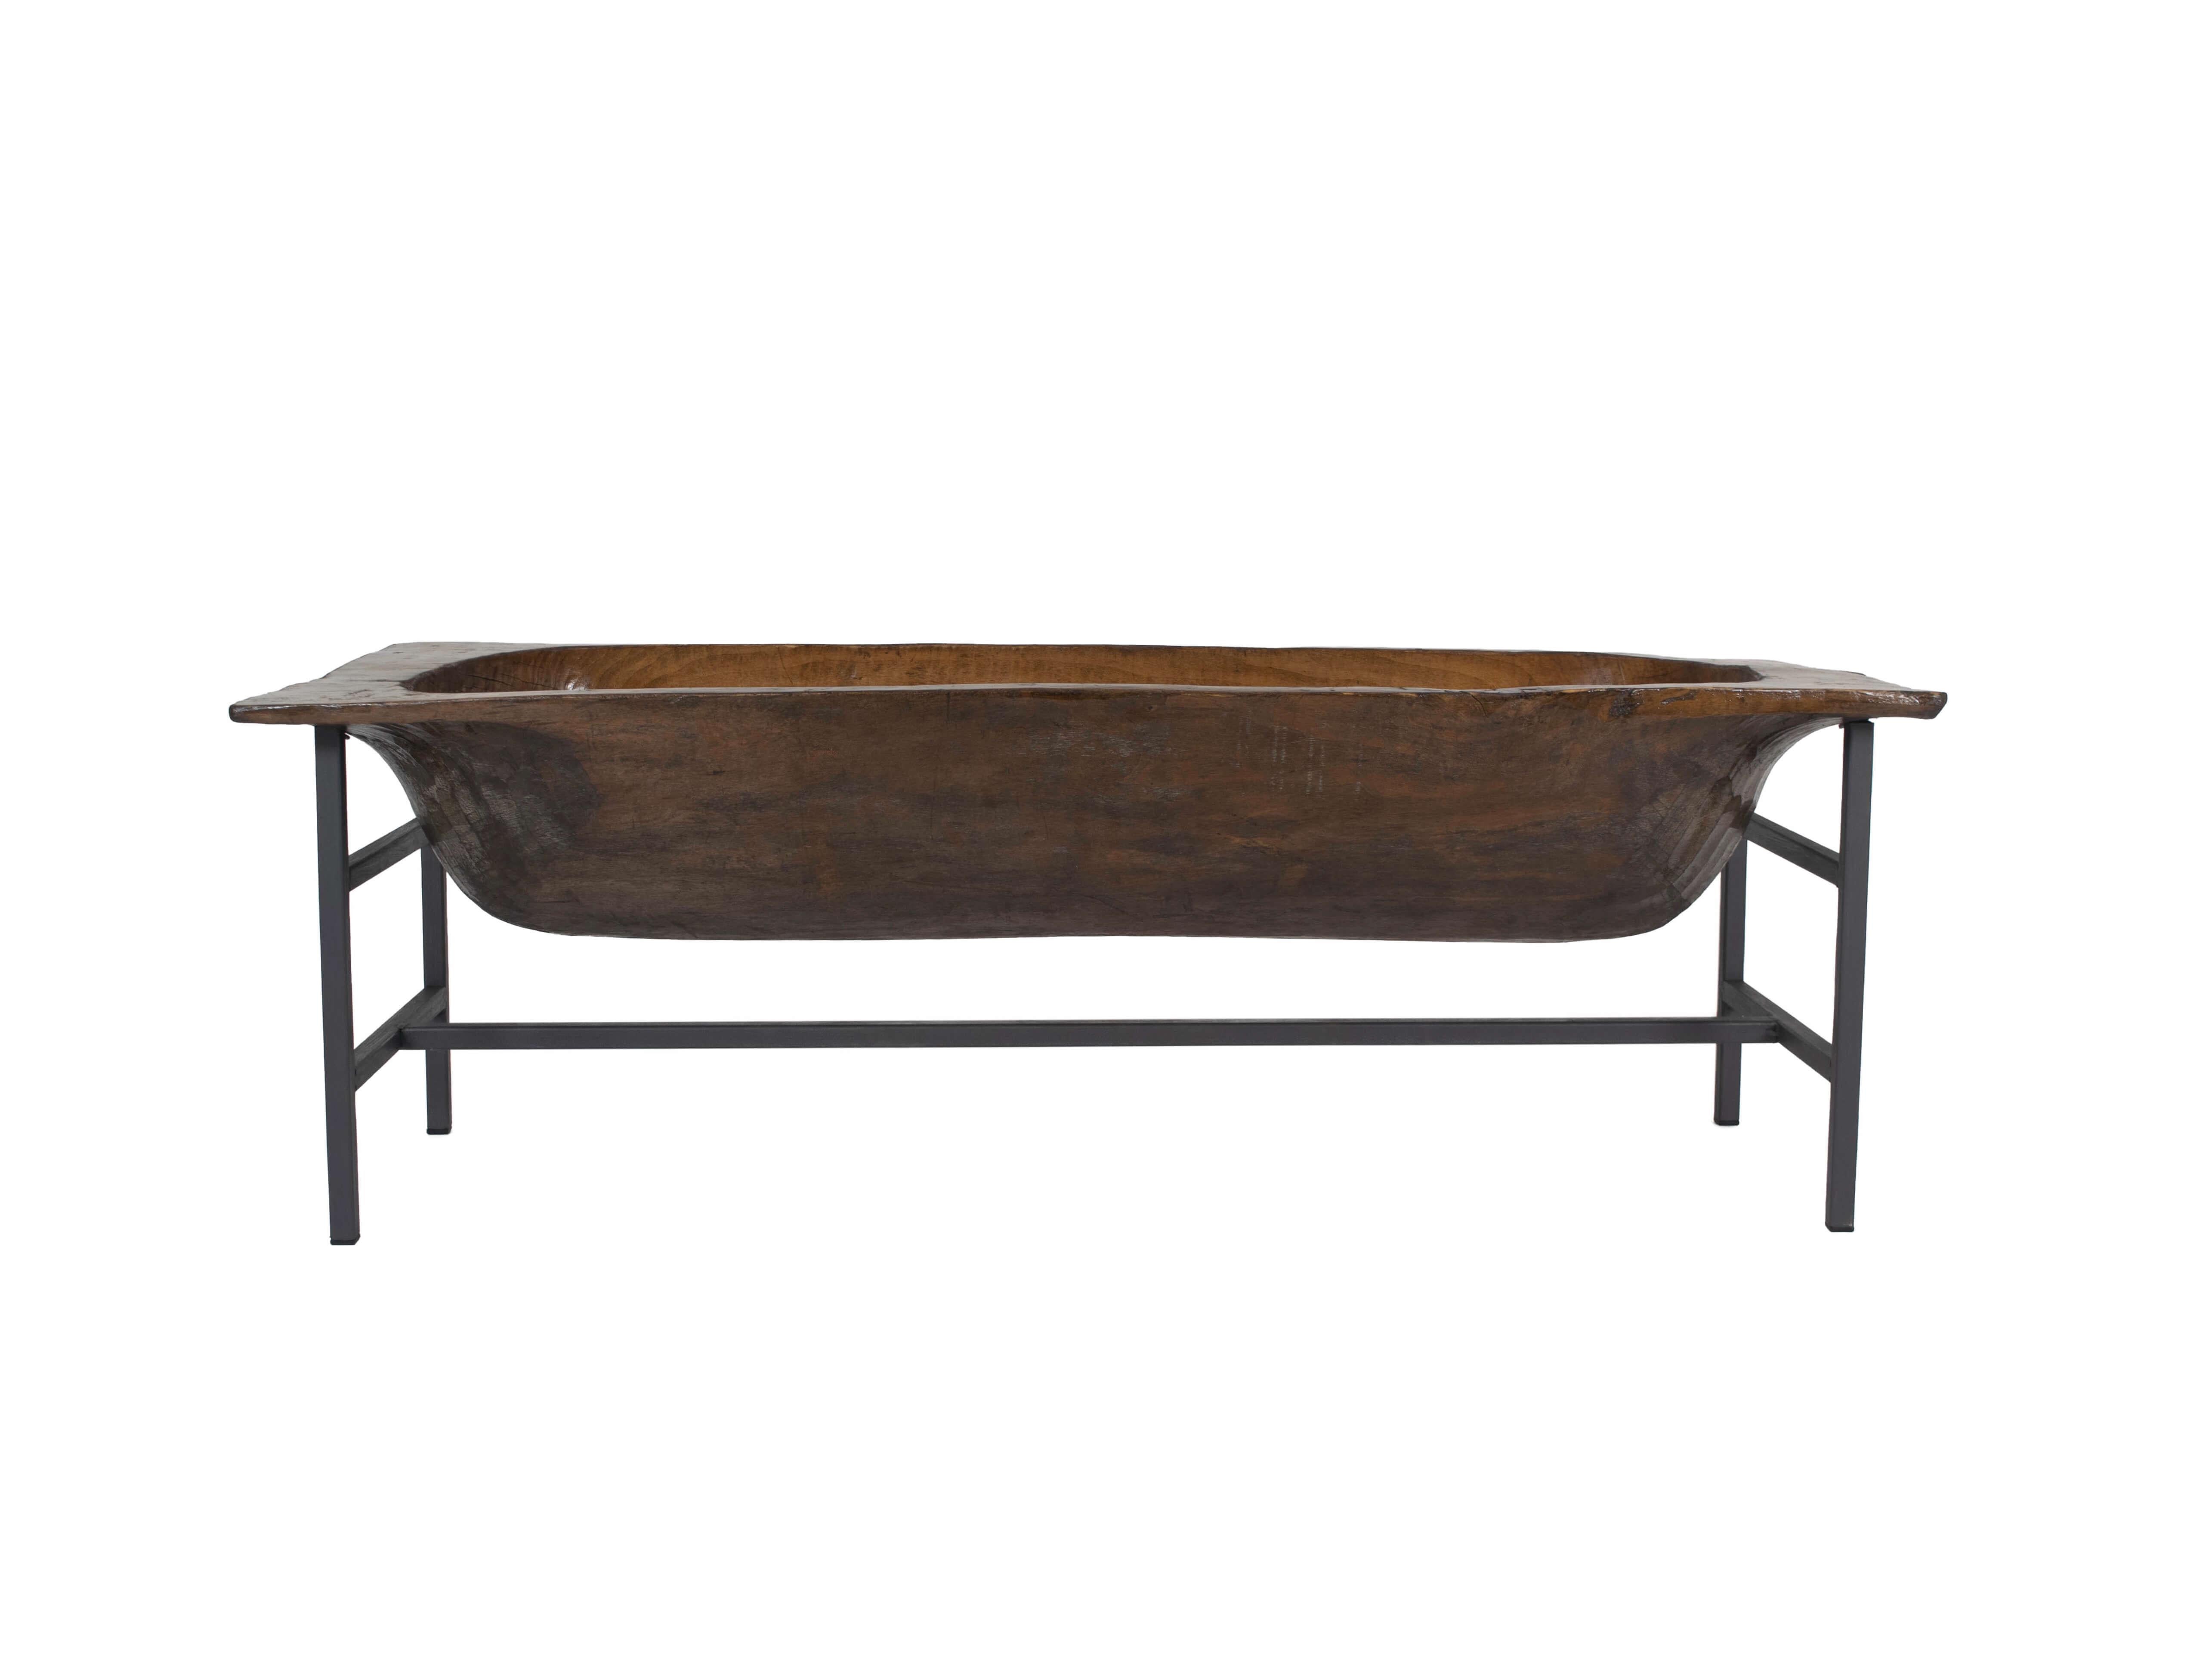 This wooden trough is simply a great decorative object. The combination of the robust and aged wood with the new steel structure makes it very interesting. It can be used as a 'side table or planter or even as a 'magazine rack'. It has a great used